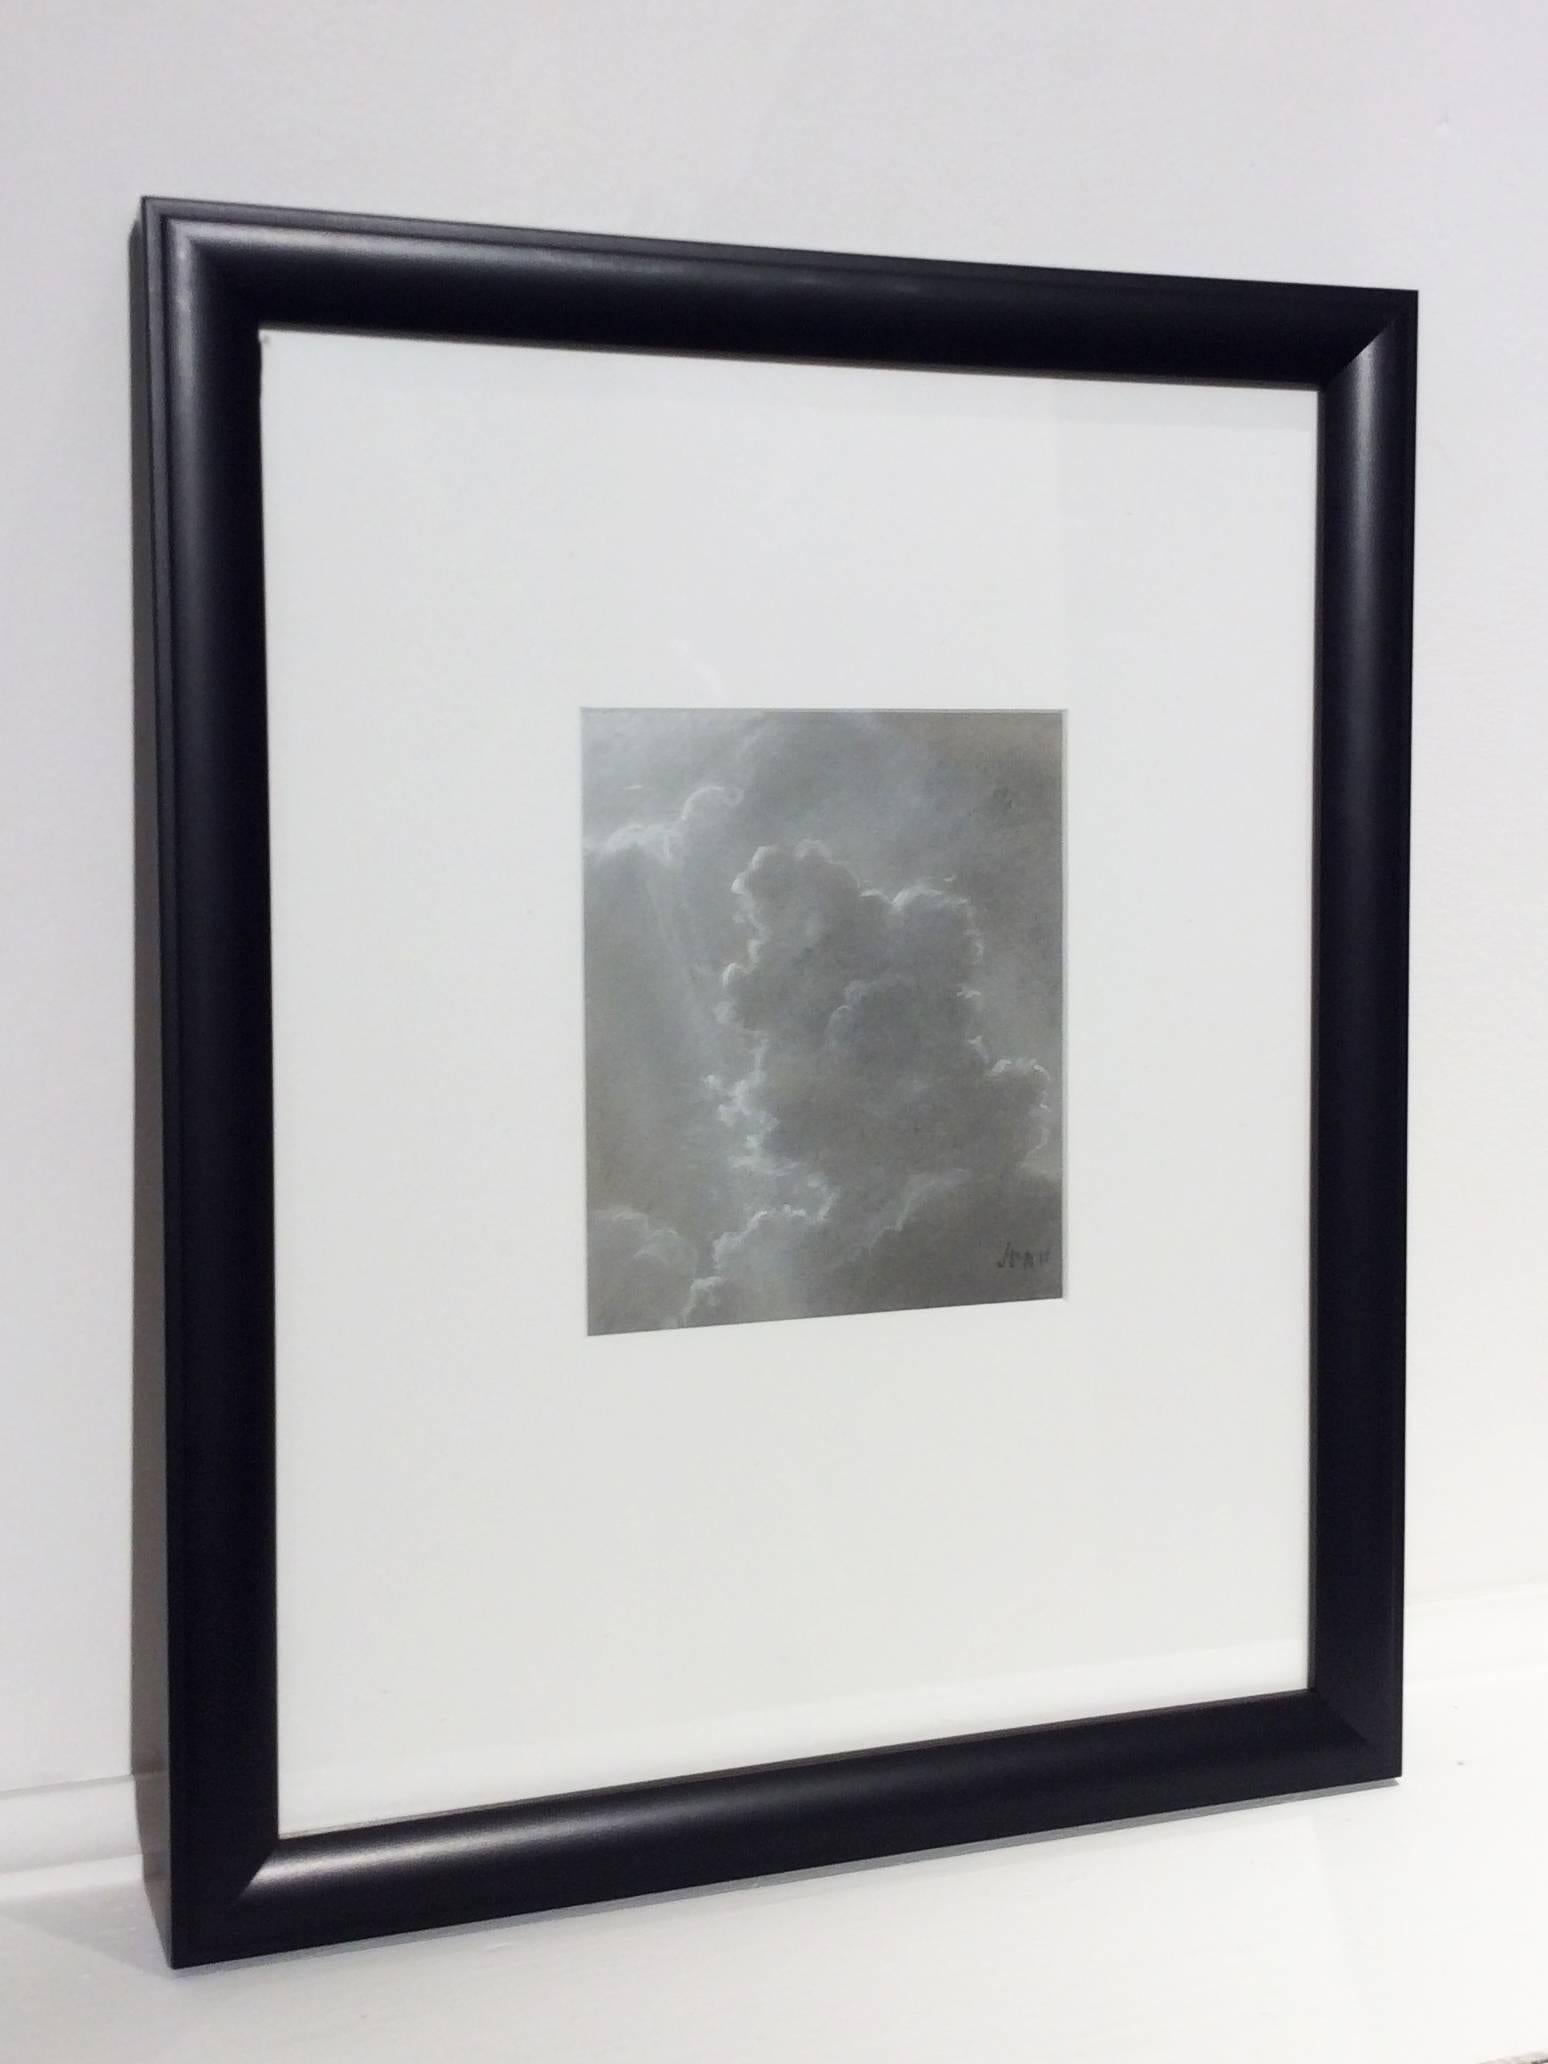 Black and white charcoal landscape drawing of sunlit clouds reminiscent of Hudson River School  and Luminist styles. 

Charcoal and chalk on paper
6 x 5 inches, 15.5 x 12.5 inches framed

A downward ray of sun dramatically outlines a towering cloud